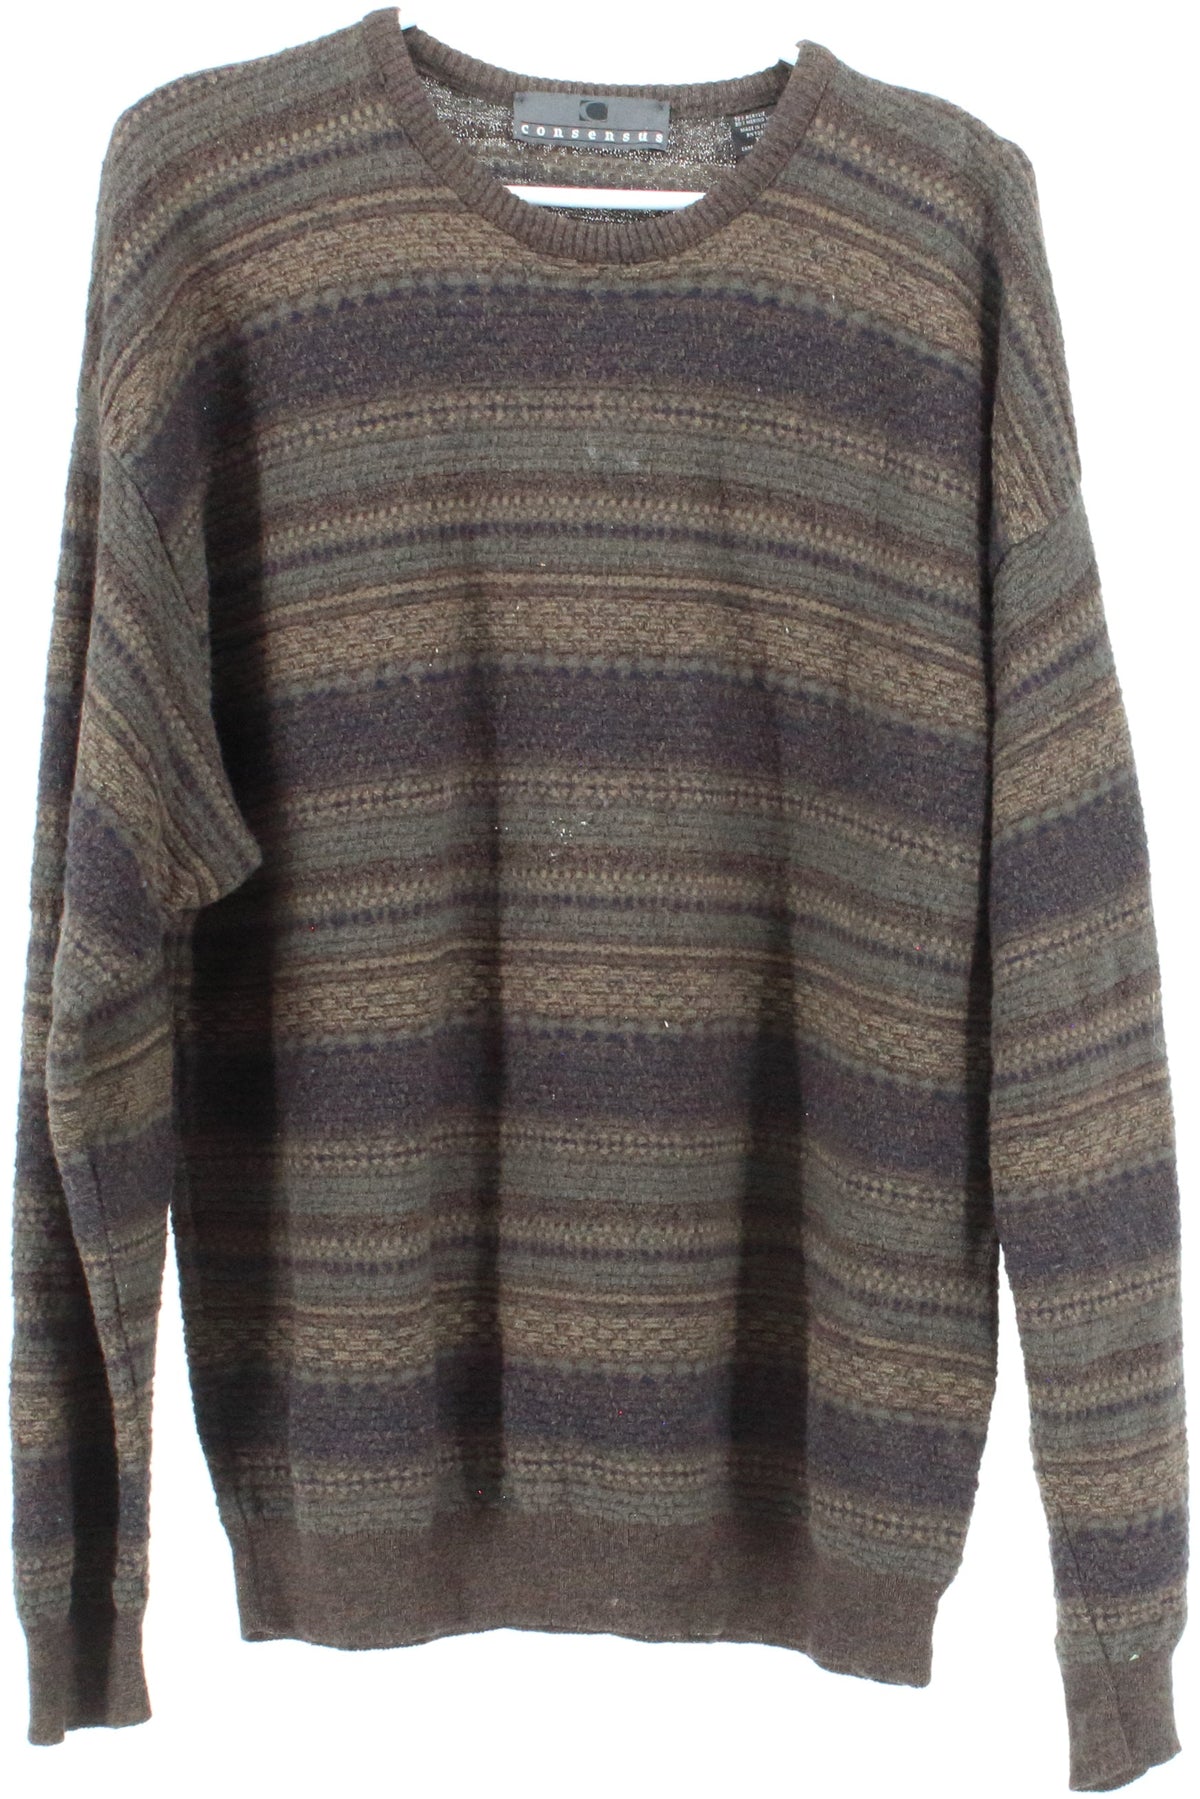 Consensus Brown and Blue Men's Sweater